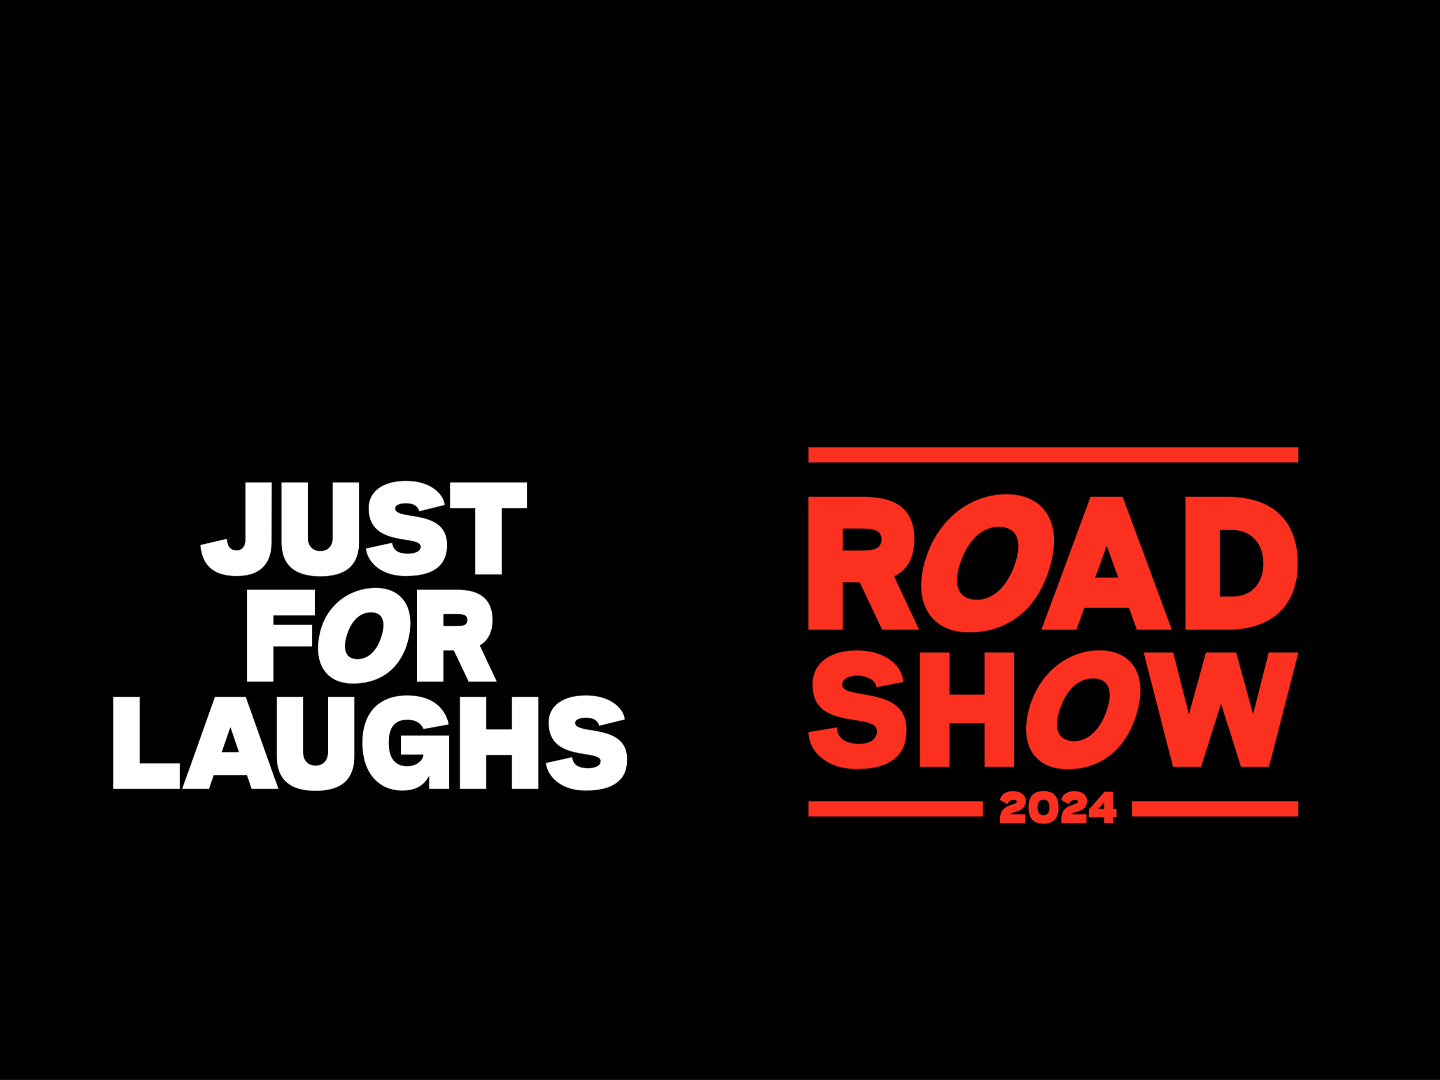 Just for Laughs Roadshow 2024